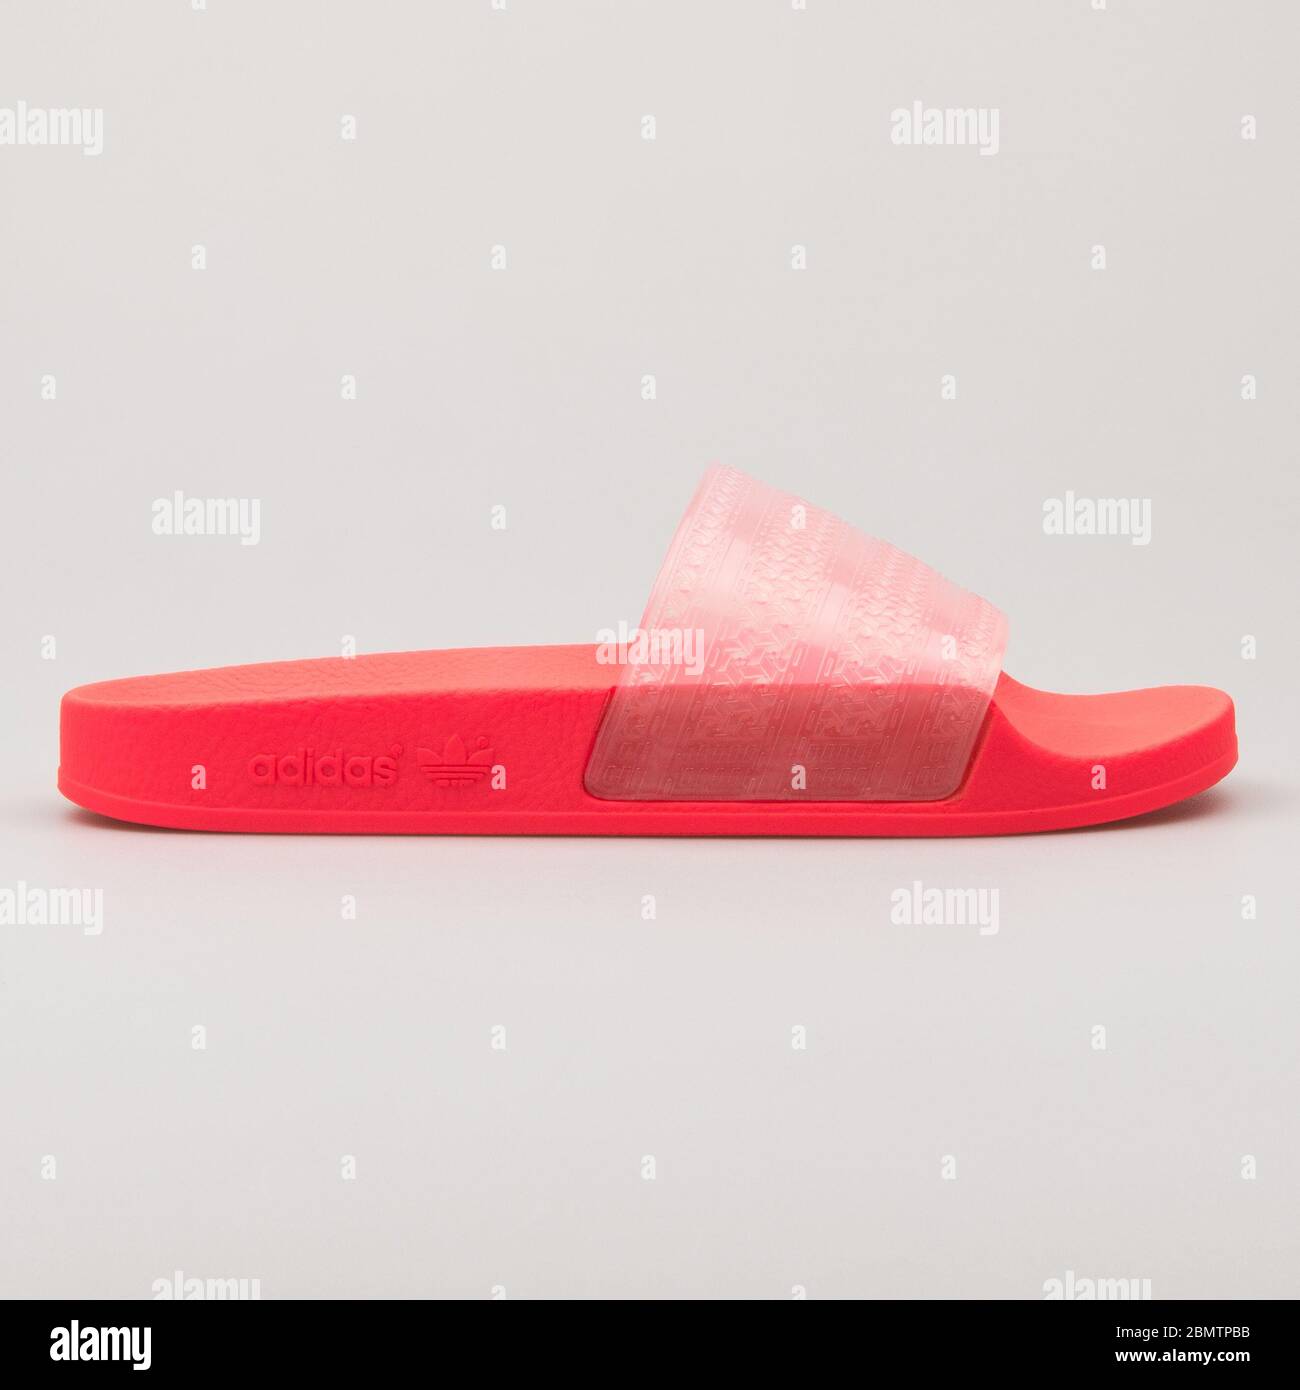 VIENNA, AUSTRIA - FEBRUARY 19, 2018: Adidas Adilette Lilo red and pink sandal on white background. Stock Photo